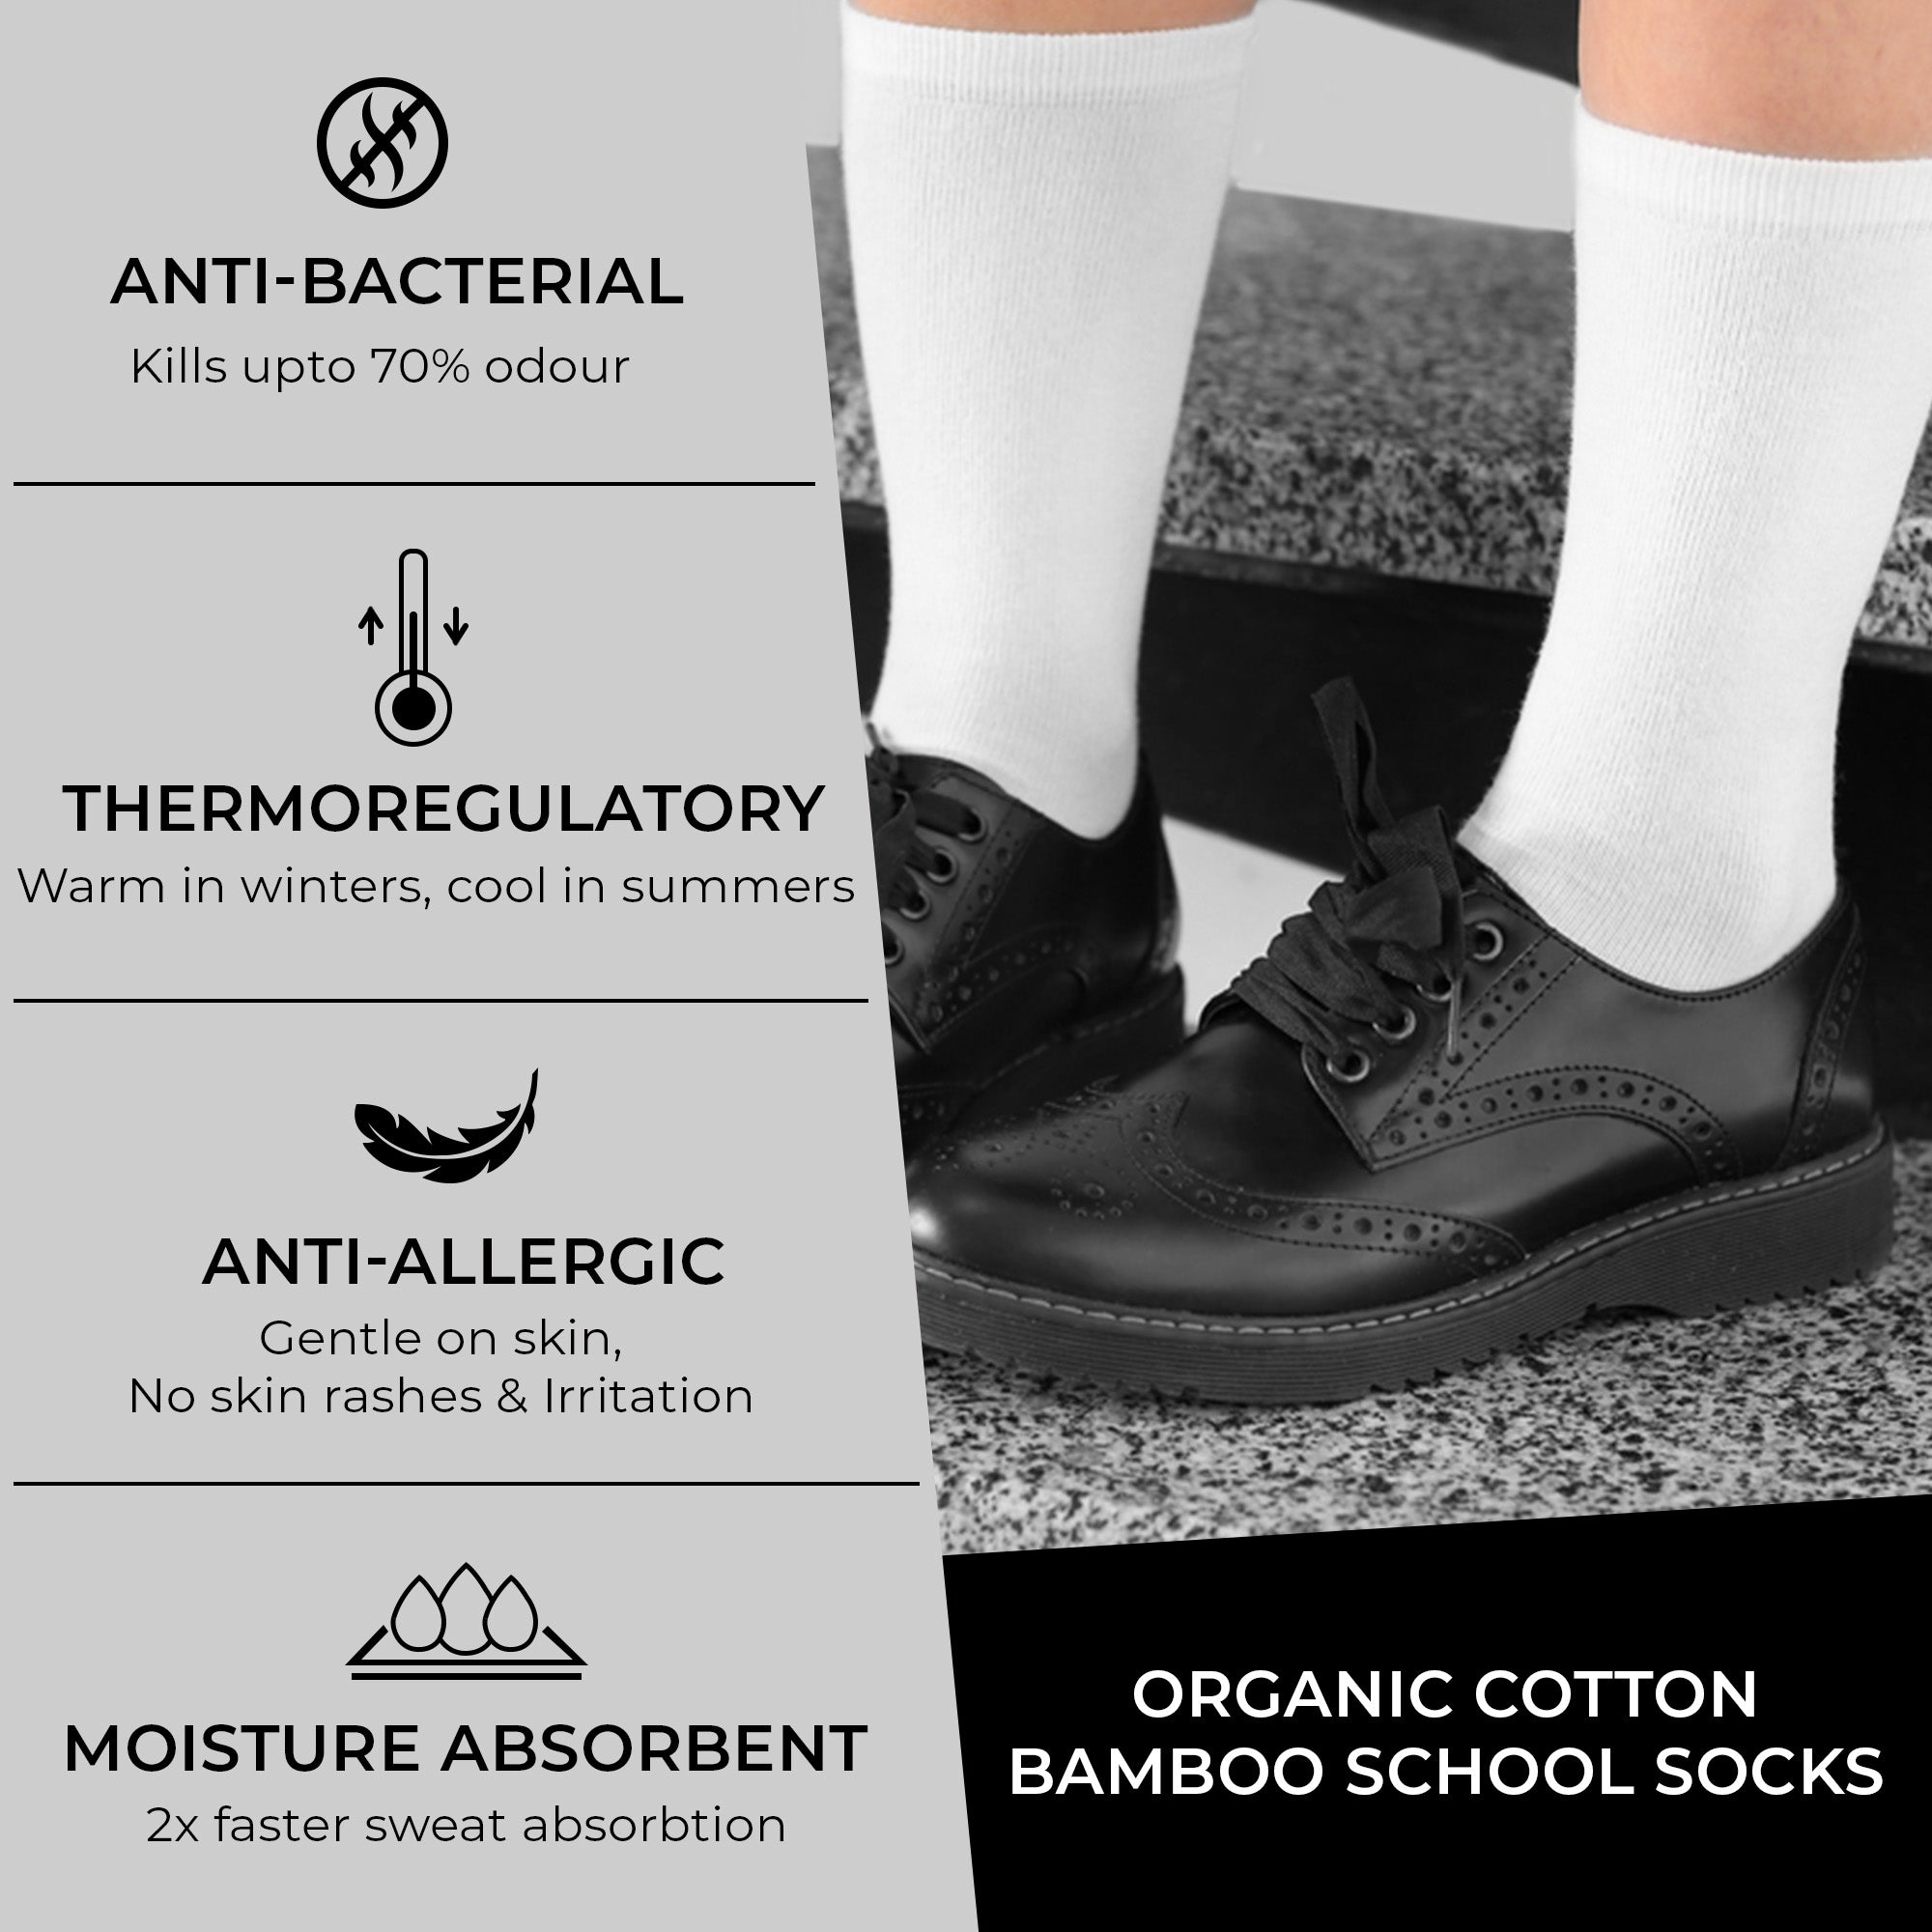 Kids Organic Cotton School Socks - Unisex - Calf length- Pack of 5 (Black)- Extra soft and Breathable